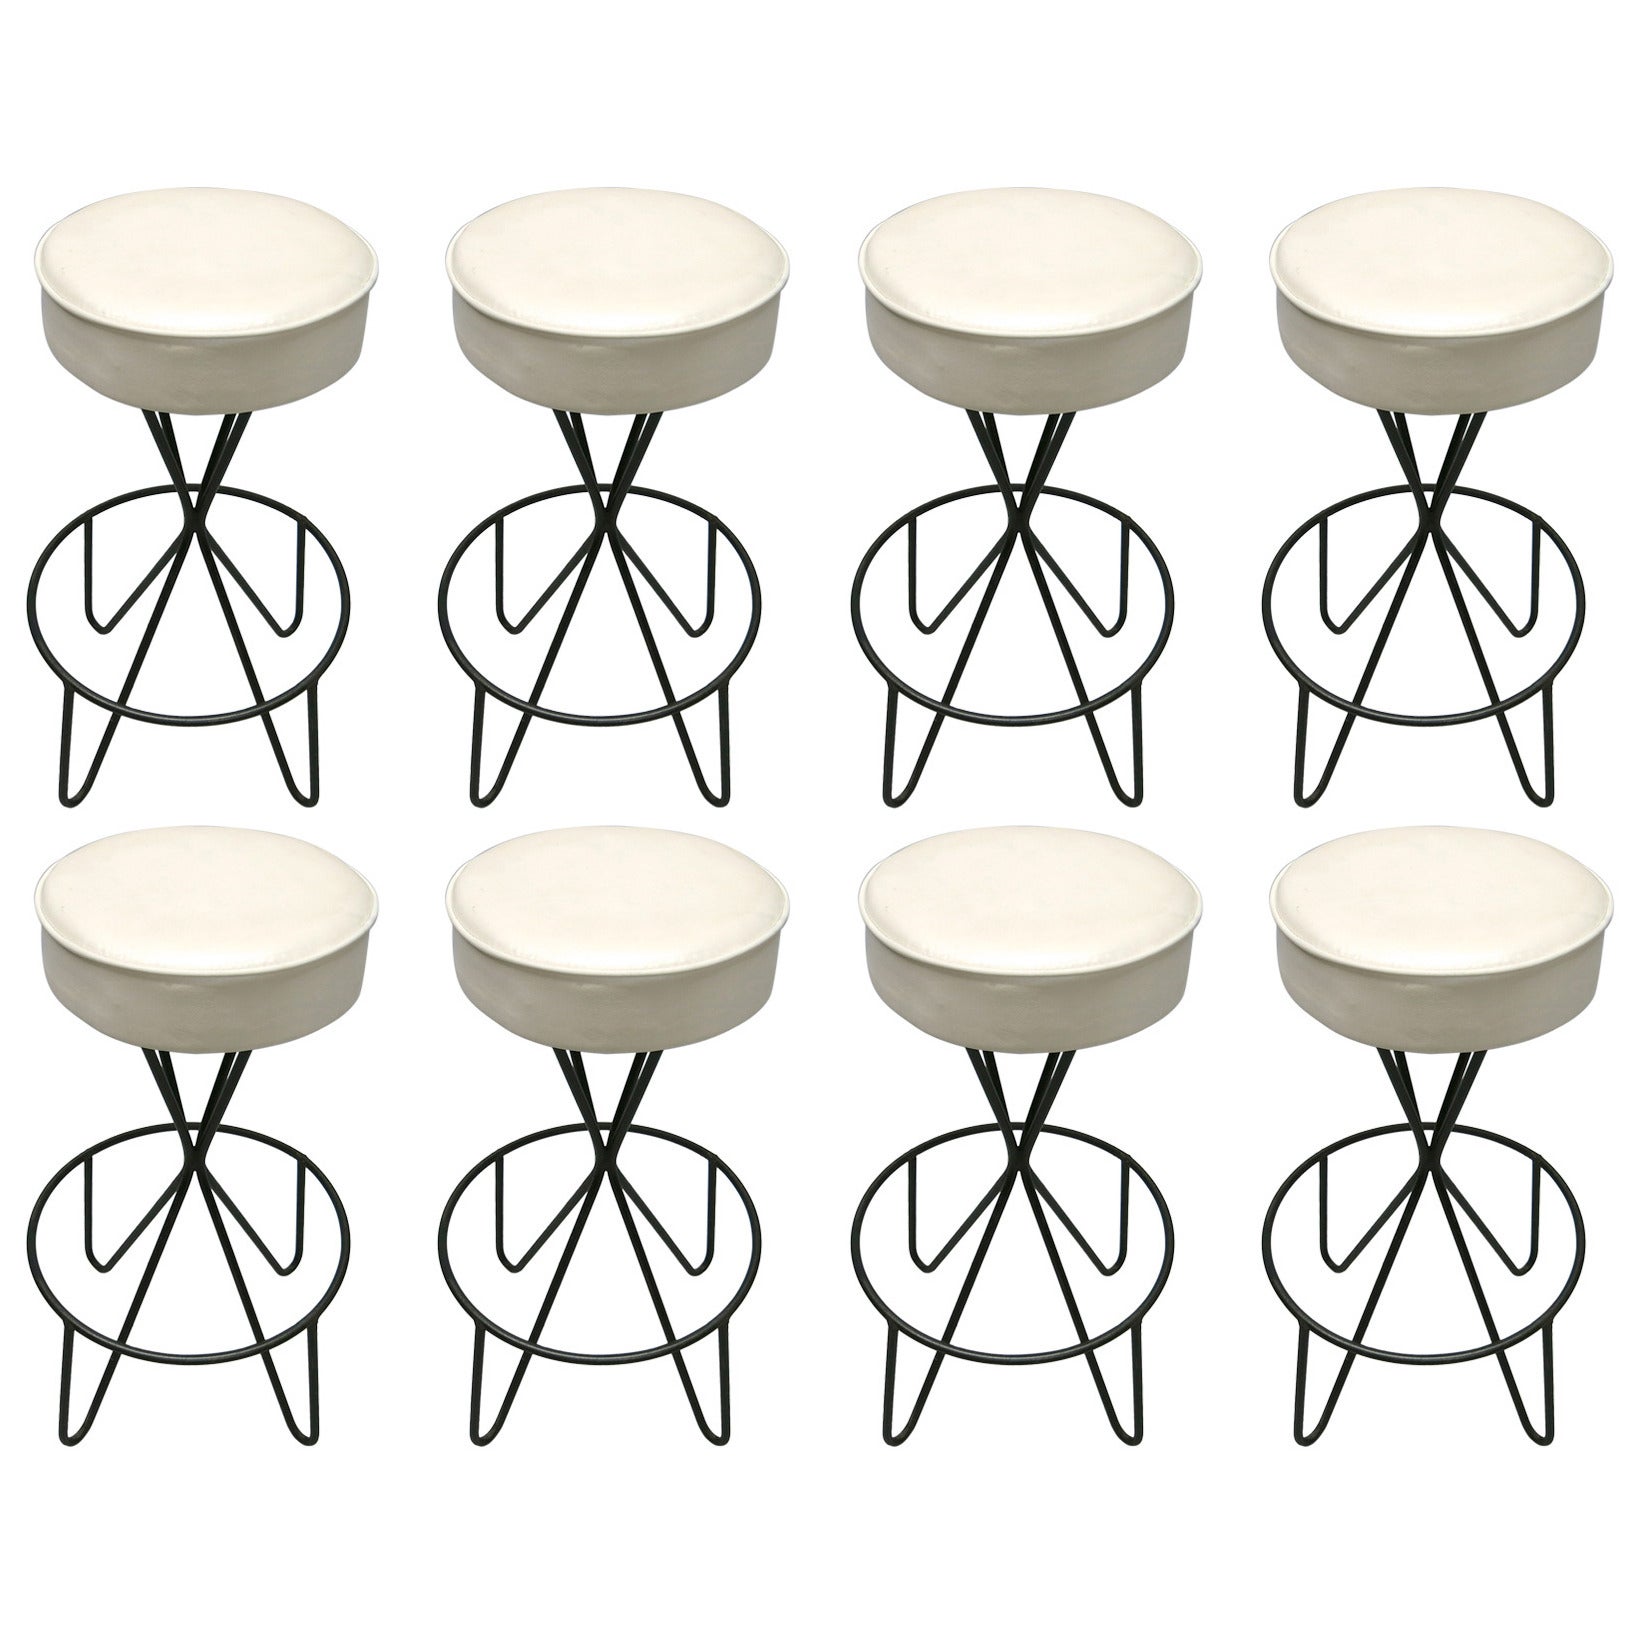 Set of Eight Swivel Stools by Paul Tuttle, Circa 1950 Made in USA